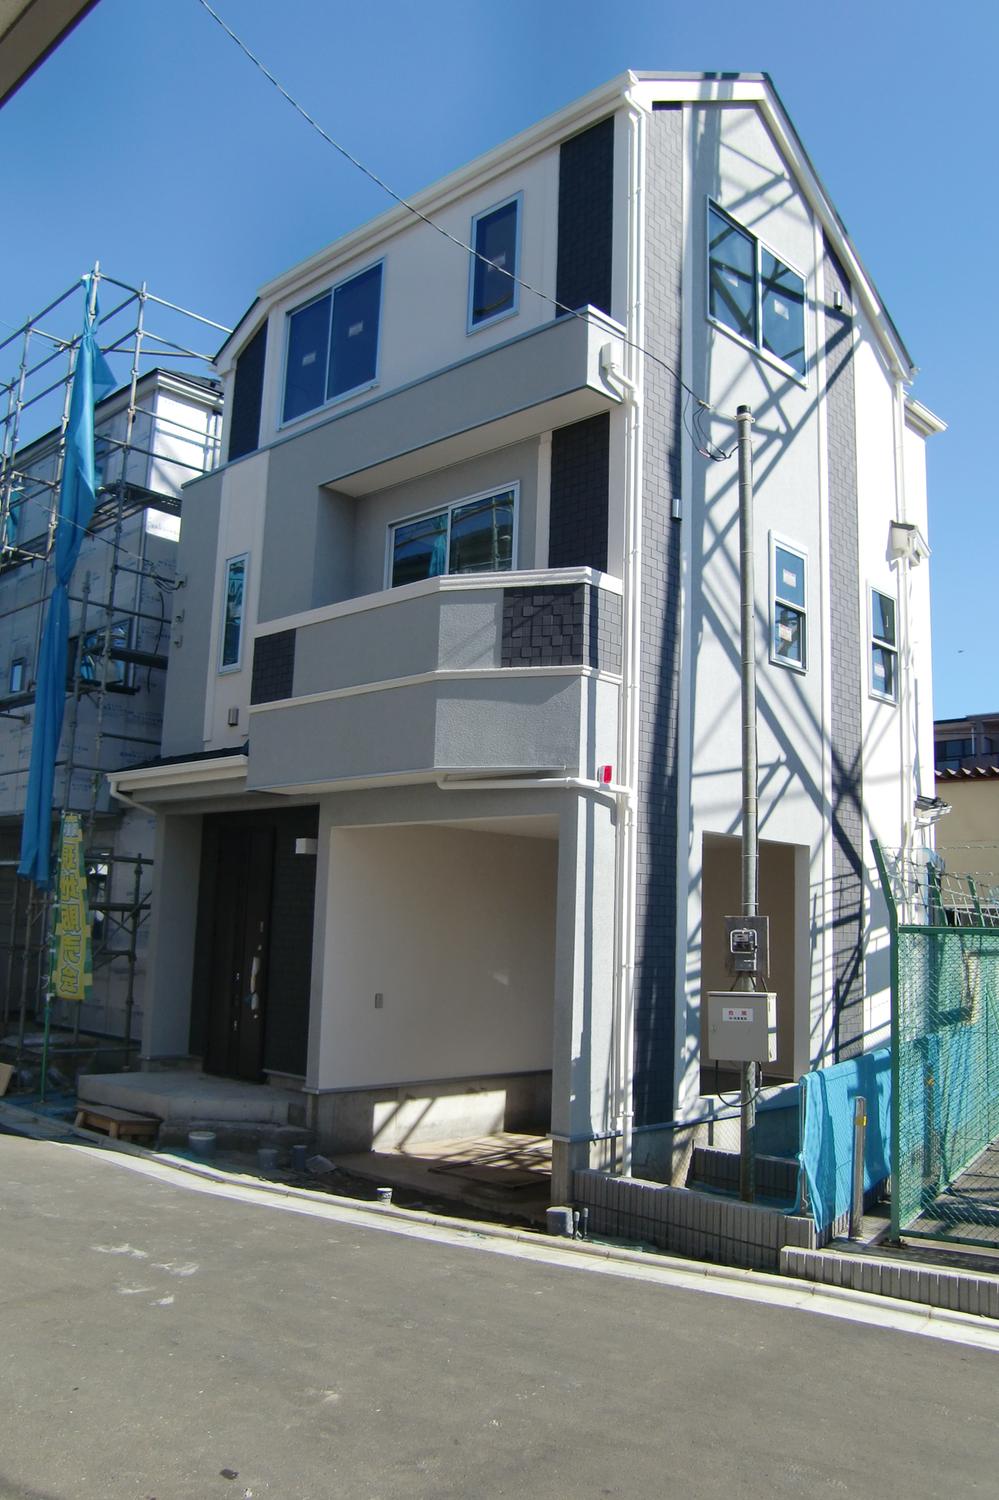 Local appearance photo. Building 3 ・ Local (10 May 2013) Shooting